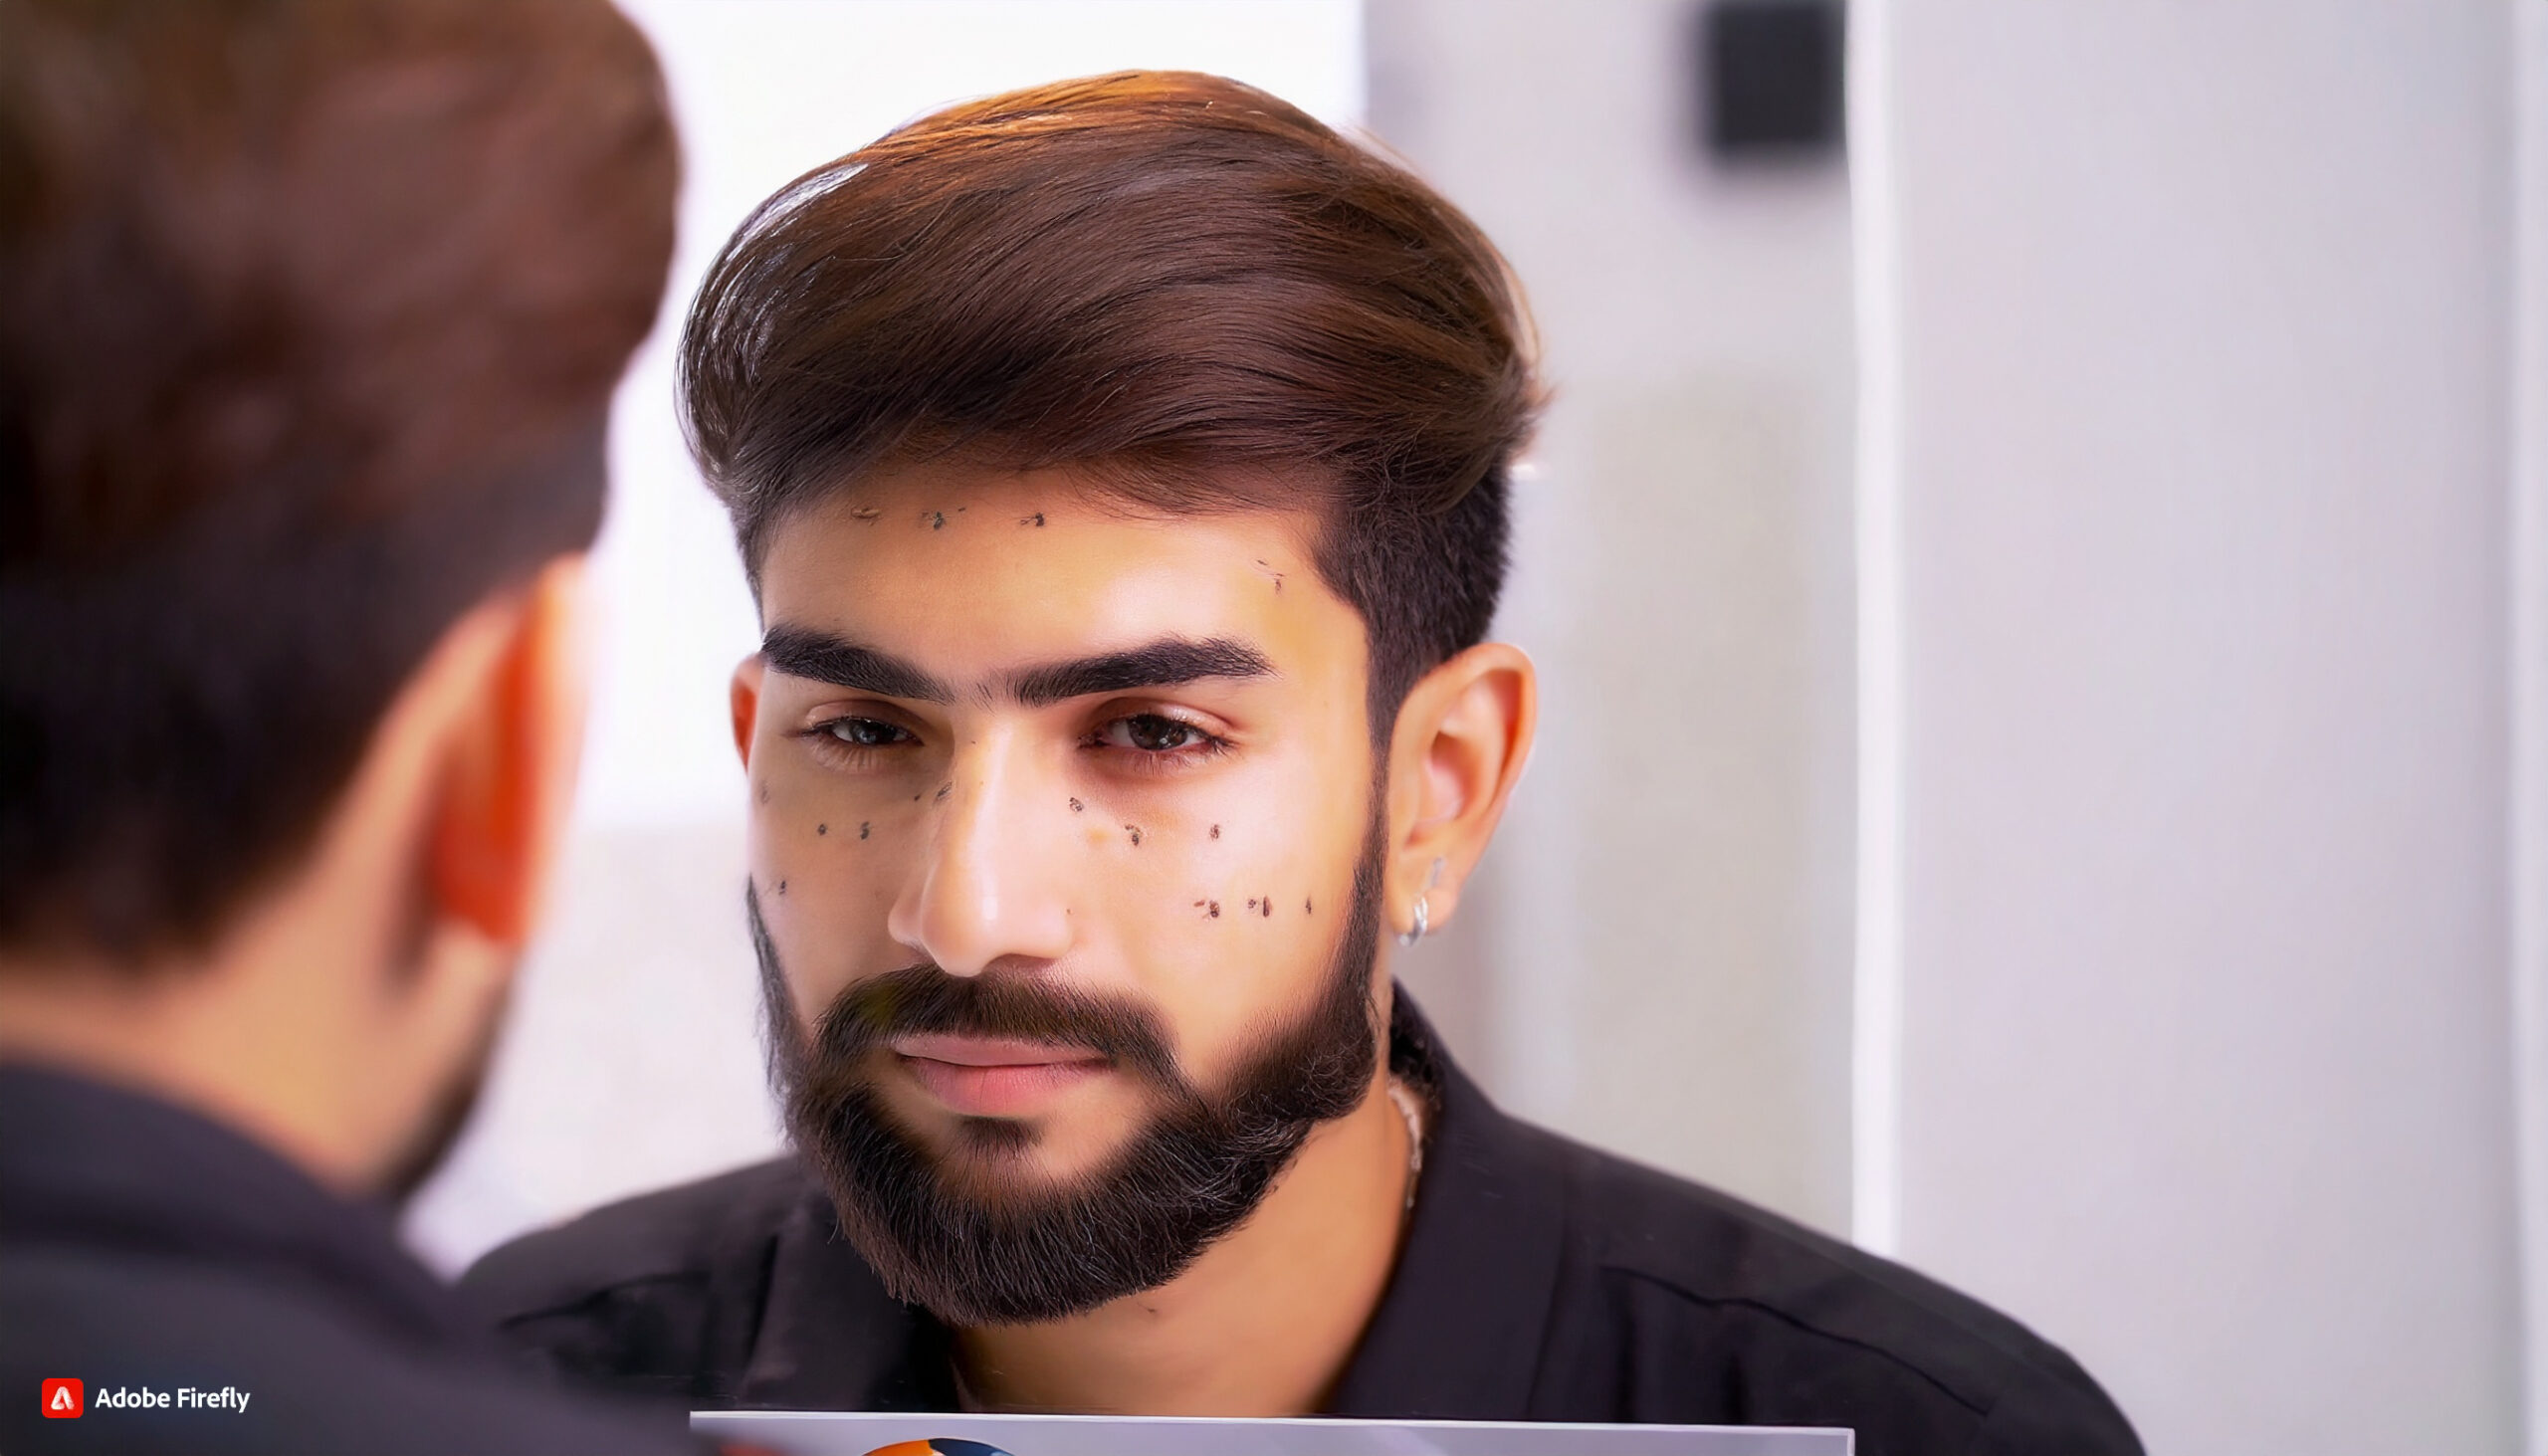 Facial Hair Implants: The Latest Trend in Men's Grooming